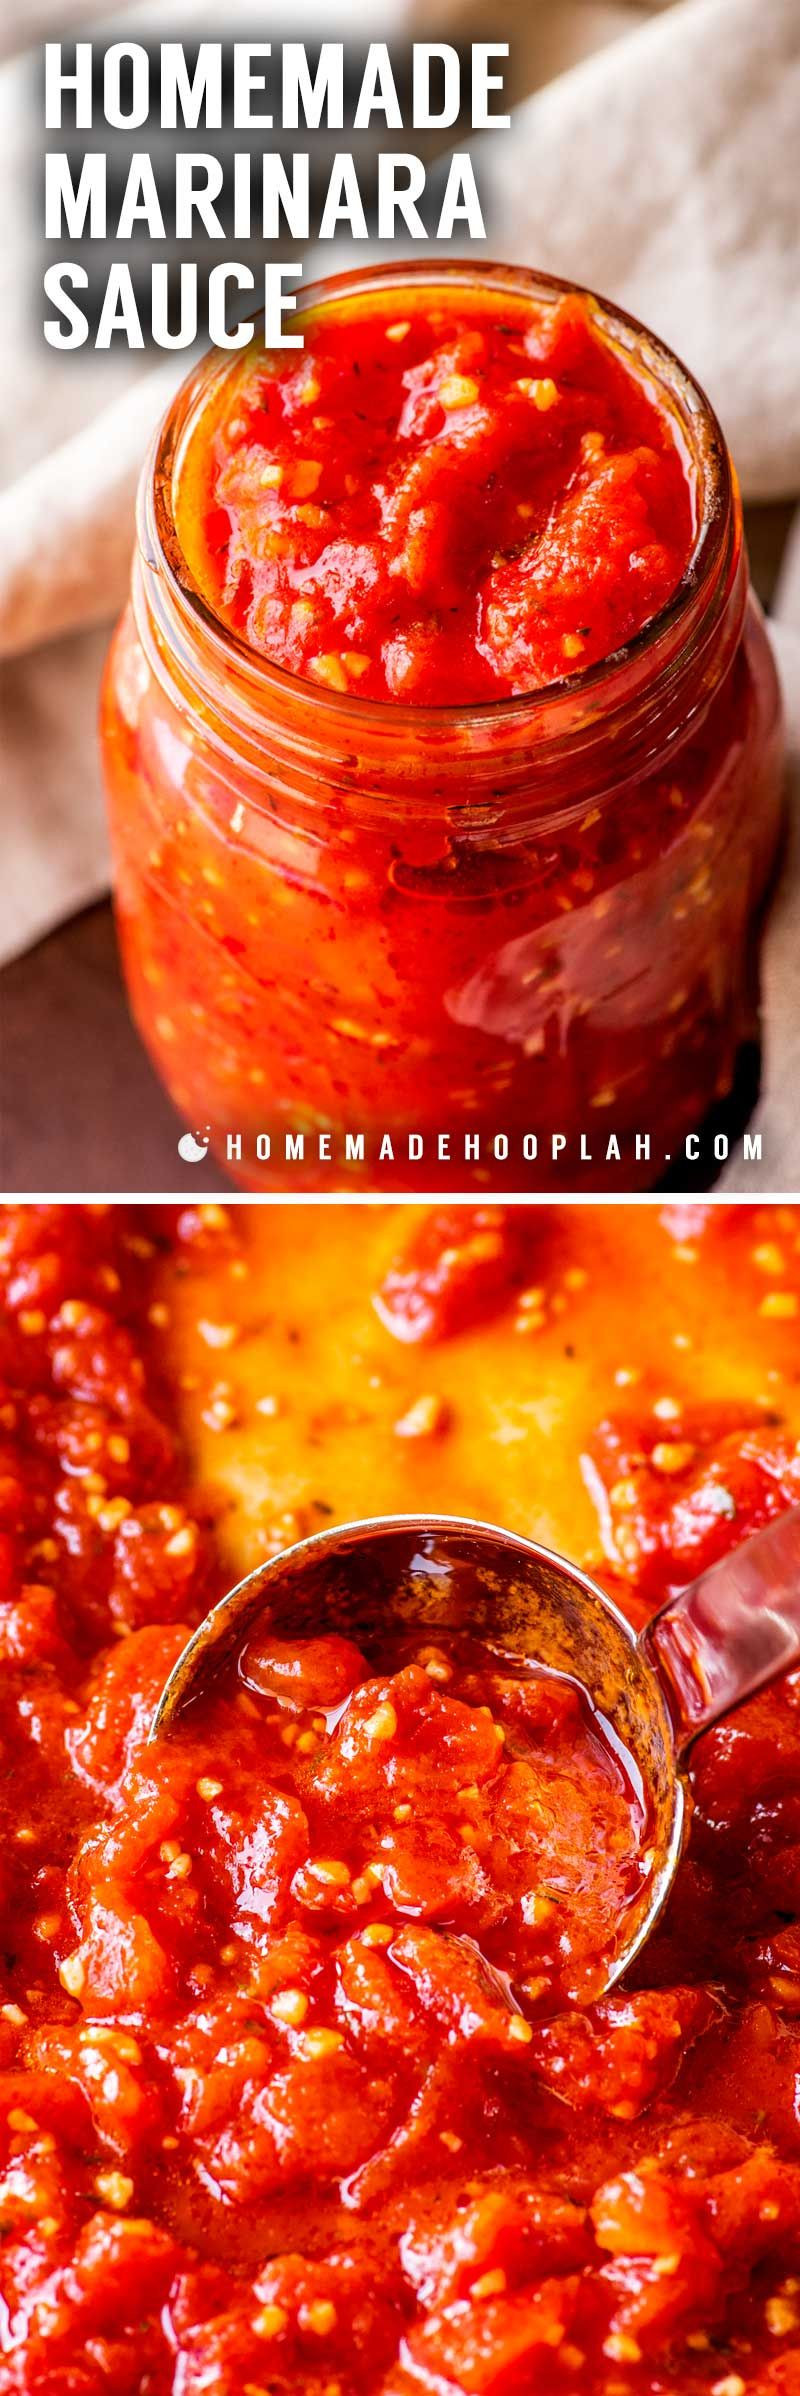 Homemade Spaghetti Sauce With Fresh Tomatoes For Canning
 Homemade Marinara Sauce This quick and easy homemade